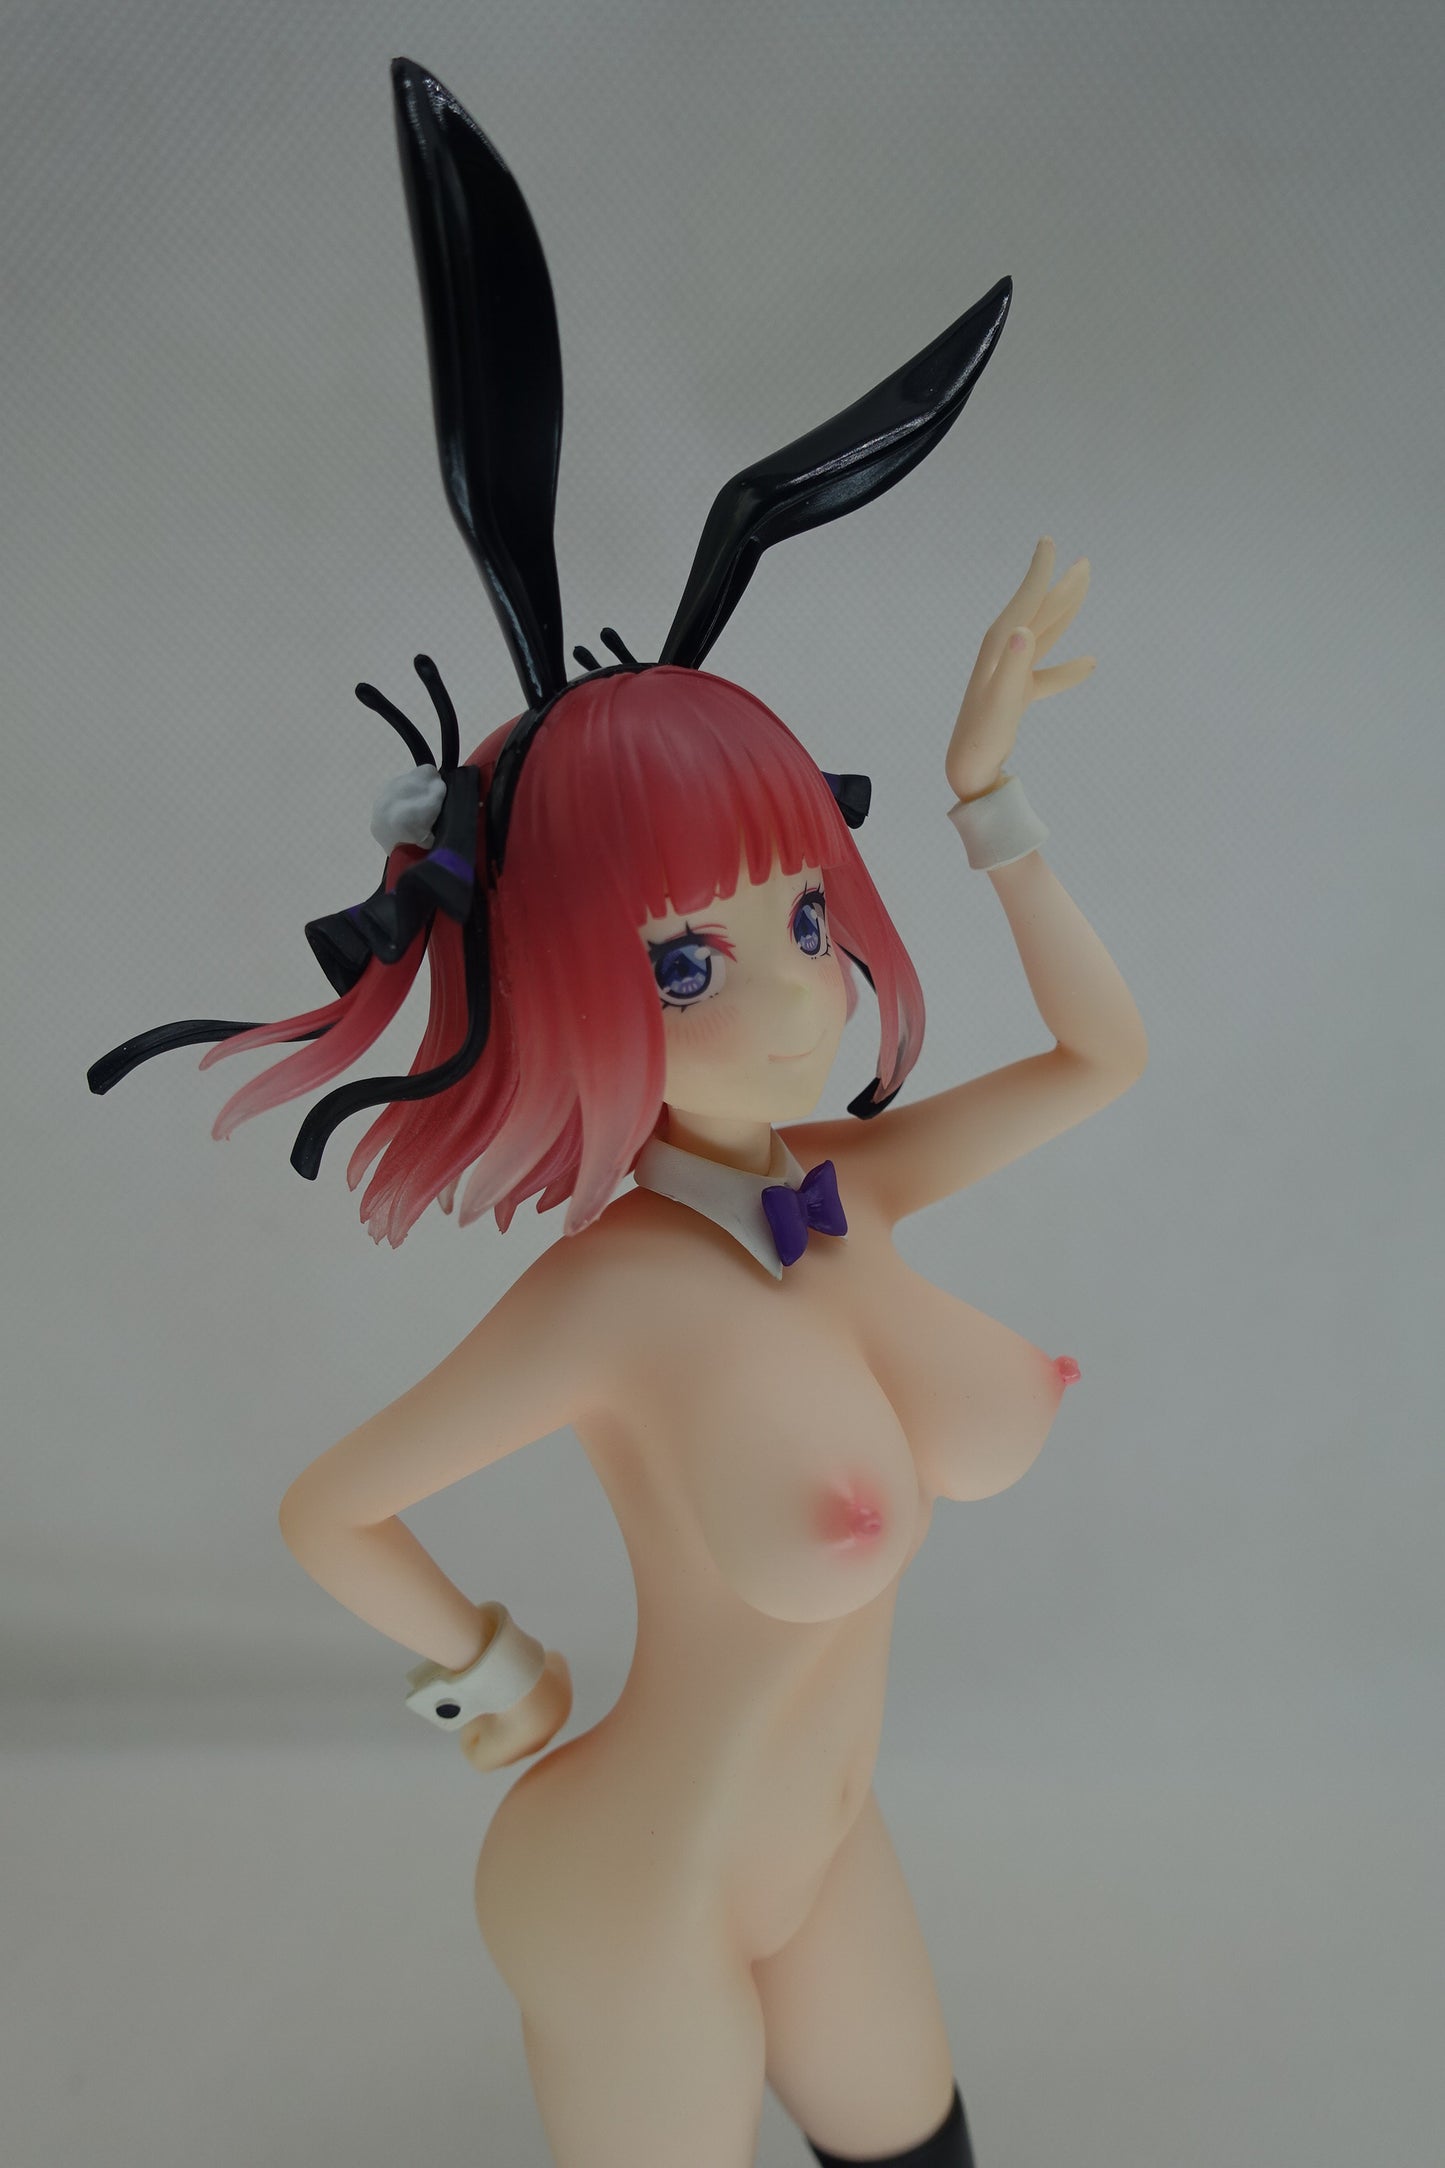 The Quintessential Quintuplets - Nino Nakano Action Figure 1/6 naked anime figure sexy